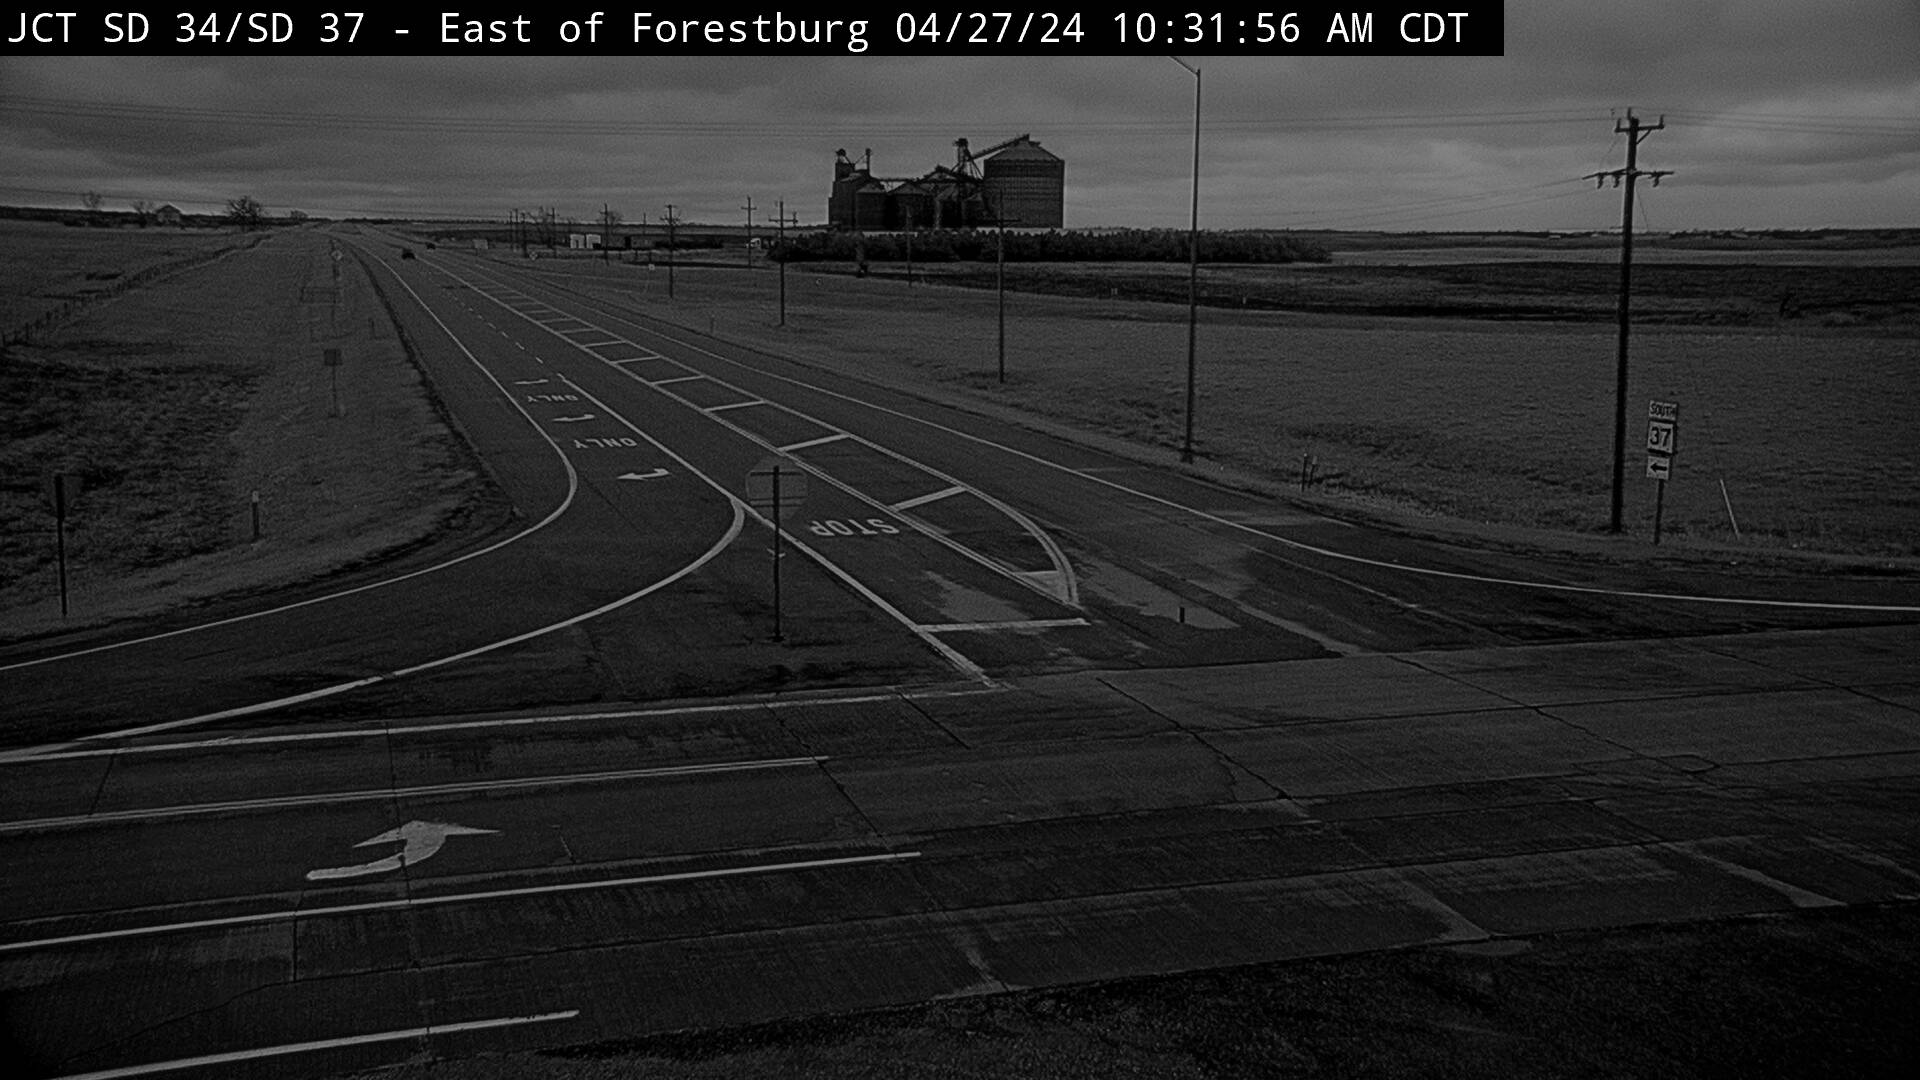 East of town at junction SD-34 & SD-37 - South Traffic Camera